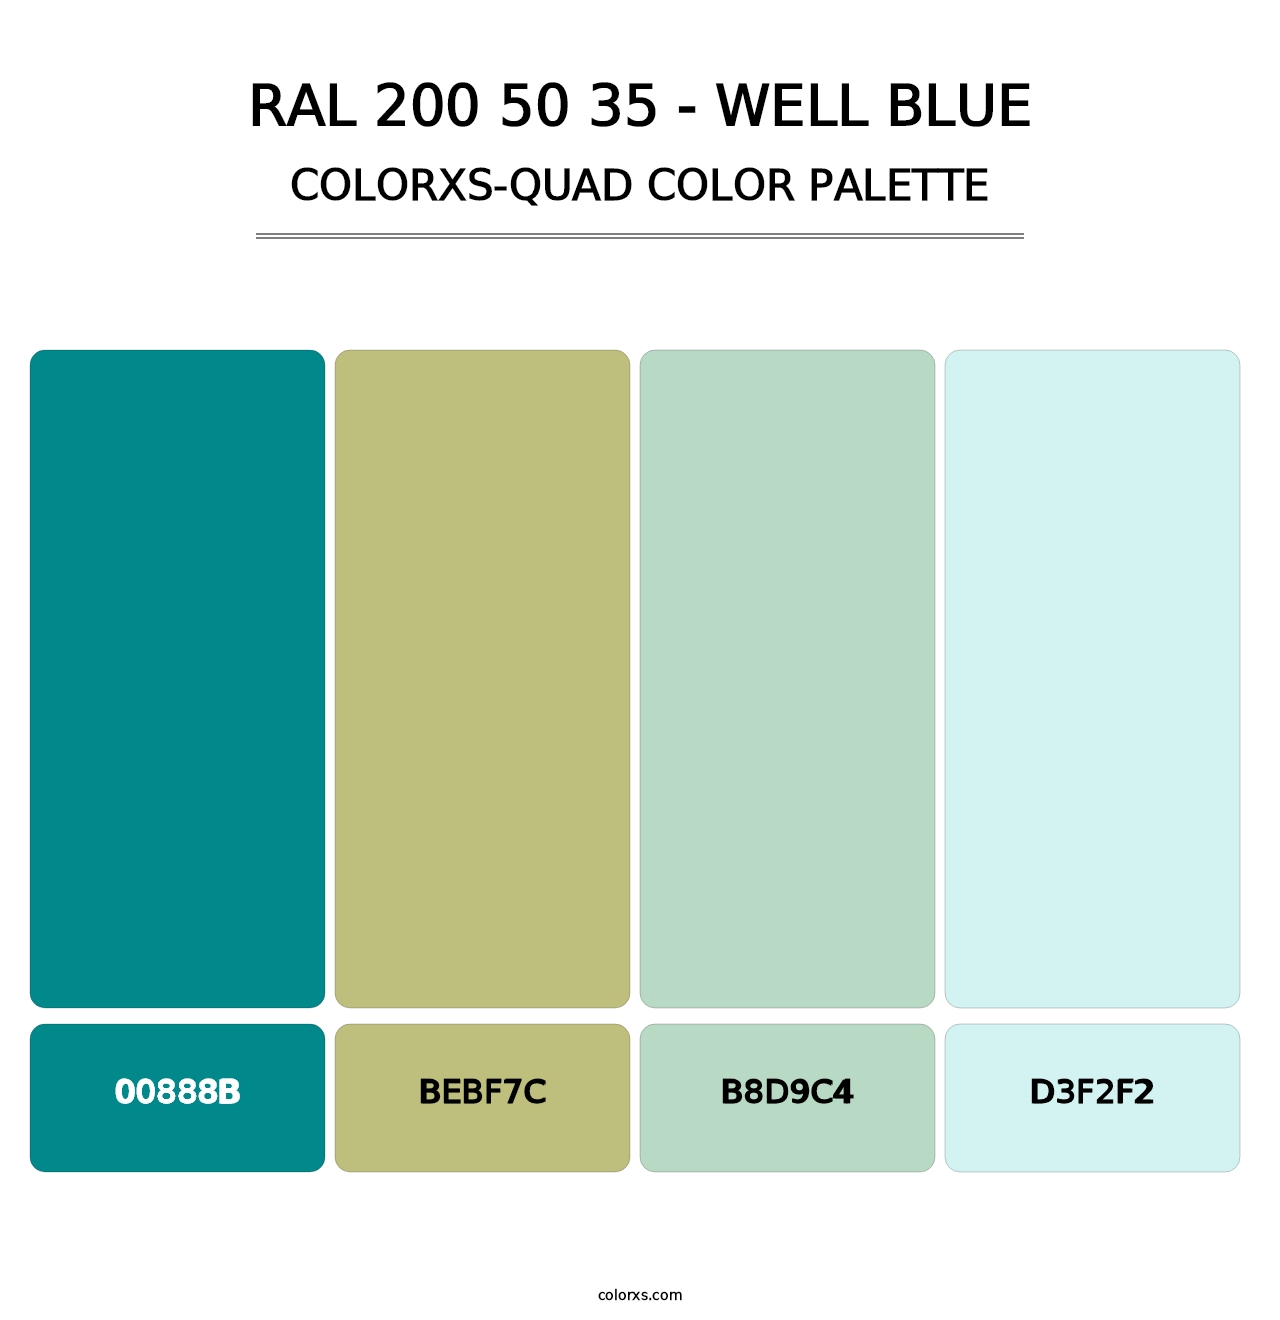 RAL 200 50 35 - Well Blue - Colorxs Quad Palette